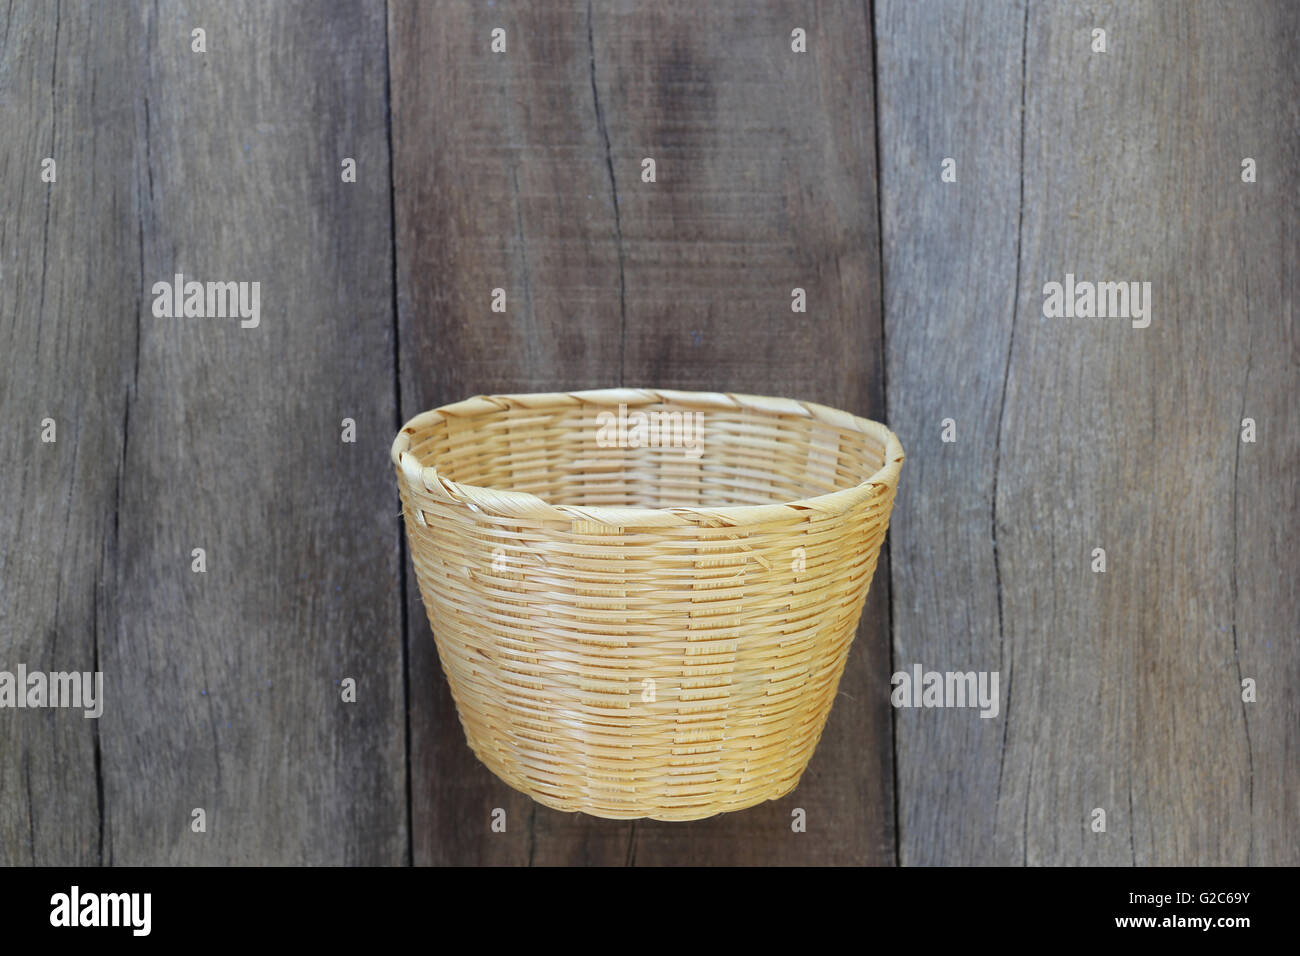 Basket weave of handicraft on old wooden for the design background. Stock Photo